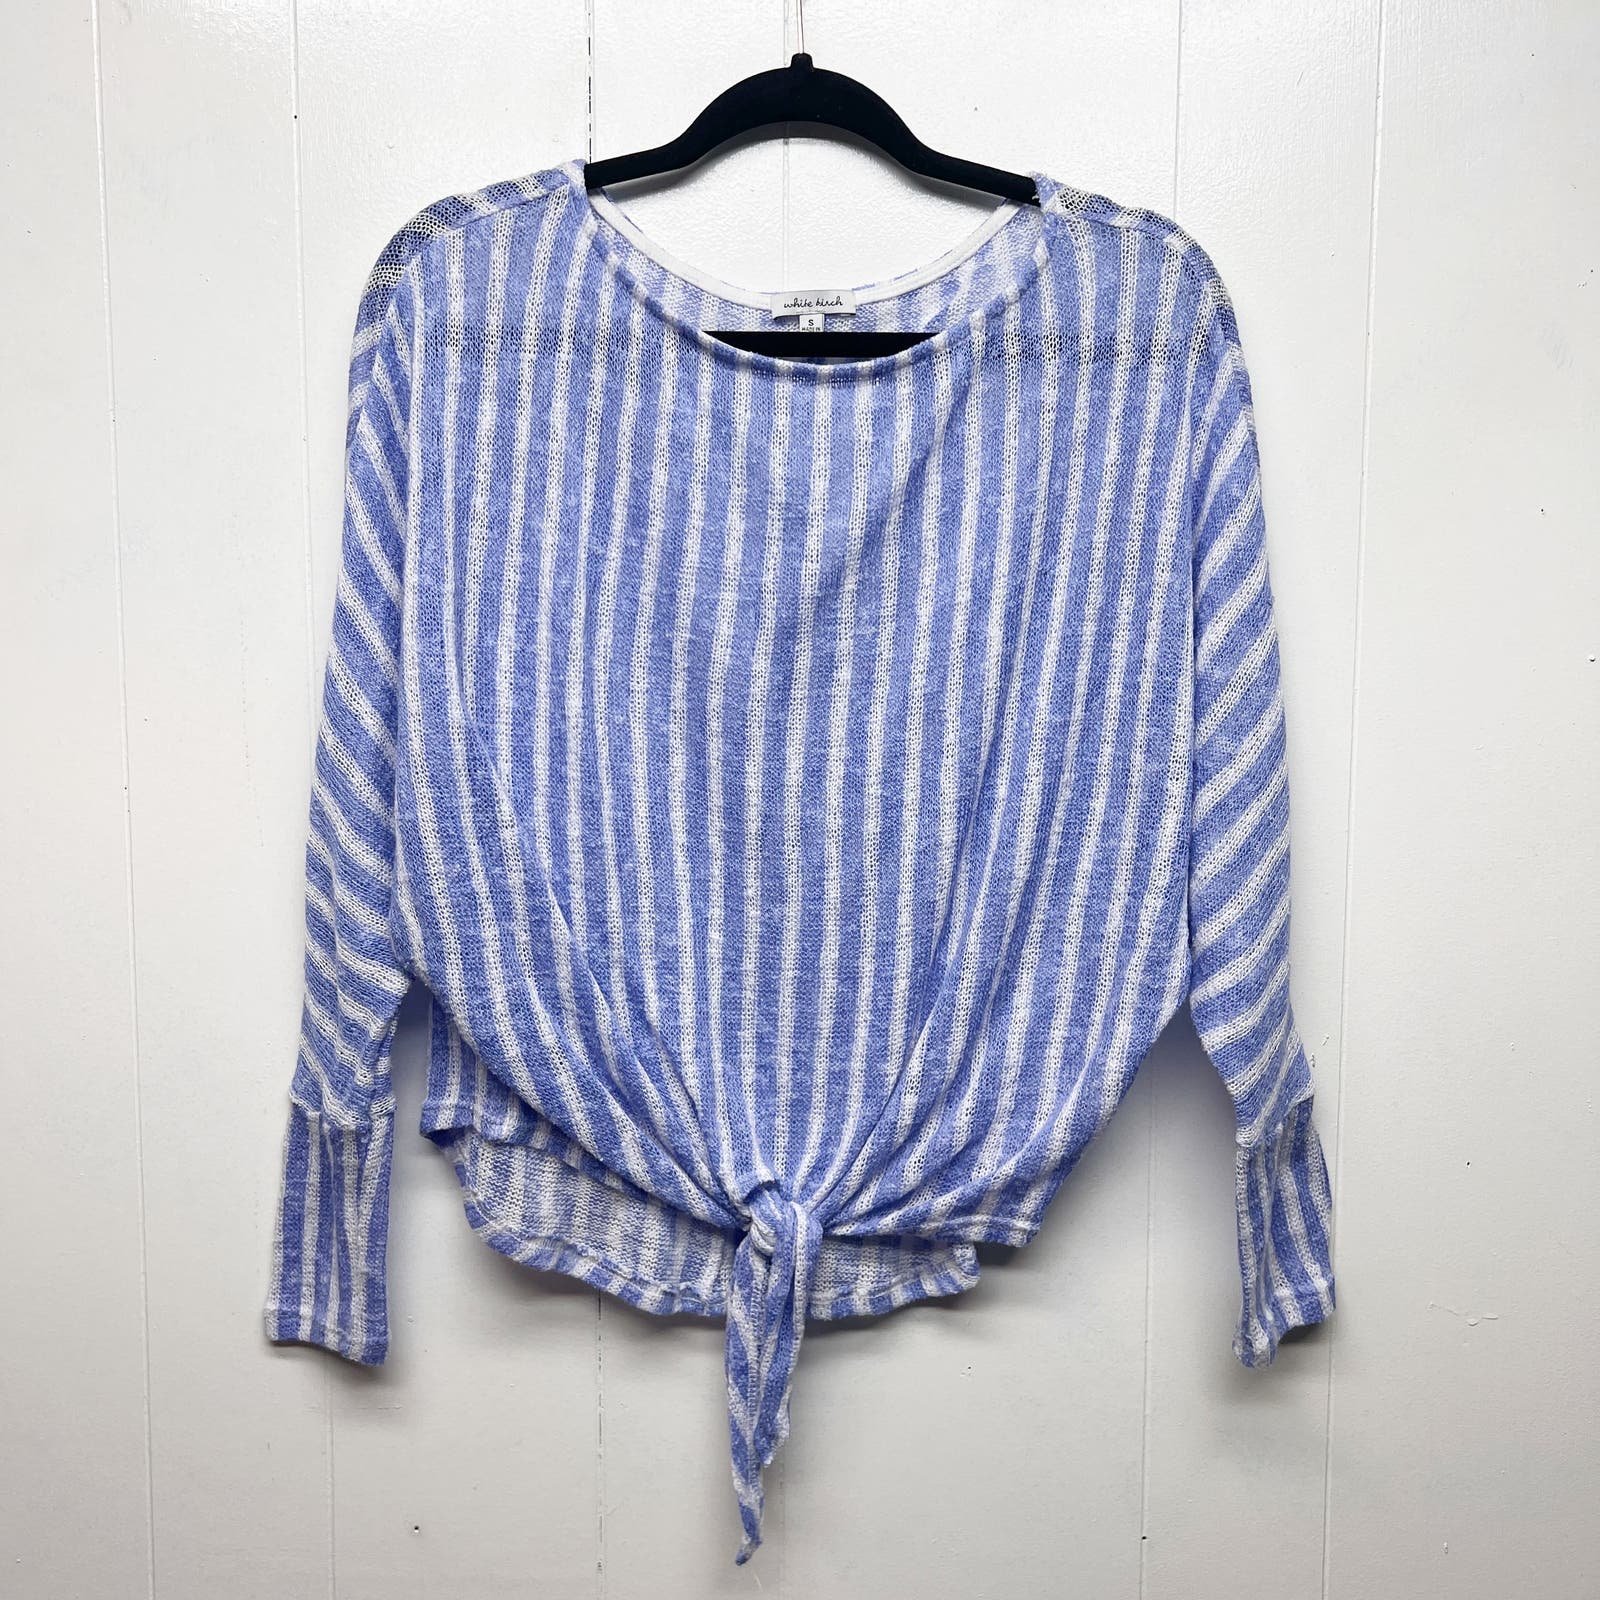 cheapest place to buy  White Birch Striped Dolman Sleeve Womens Pullover Sweater Size Small Lightweight H4RPsPRHI Outlet Store